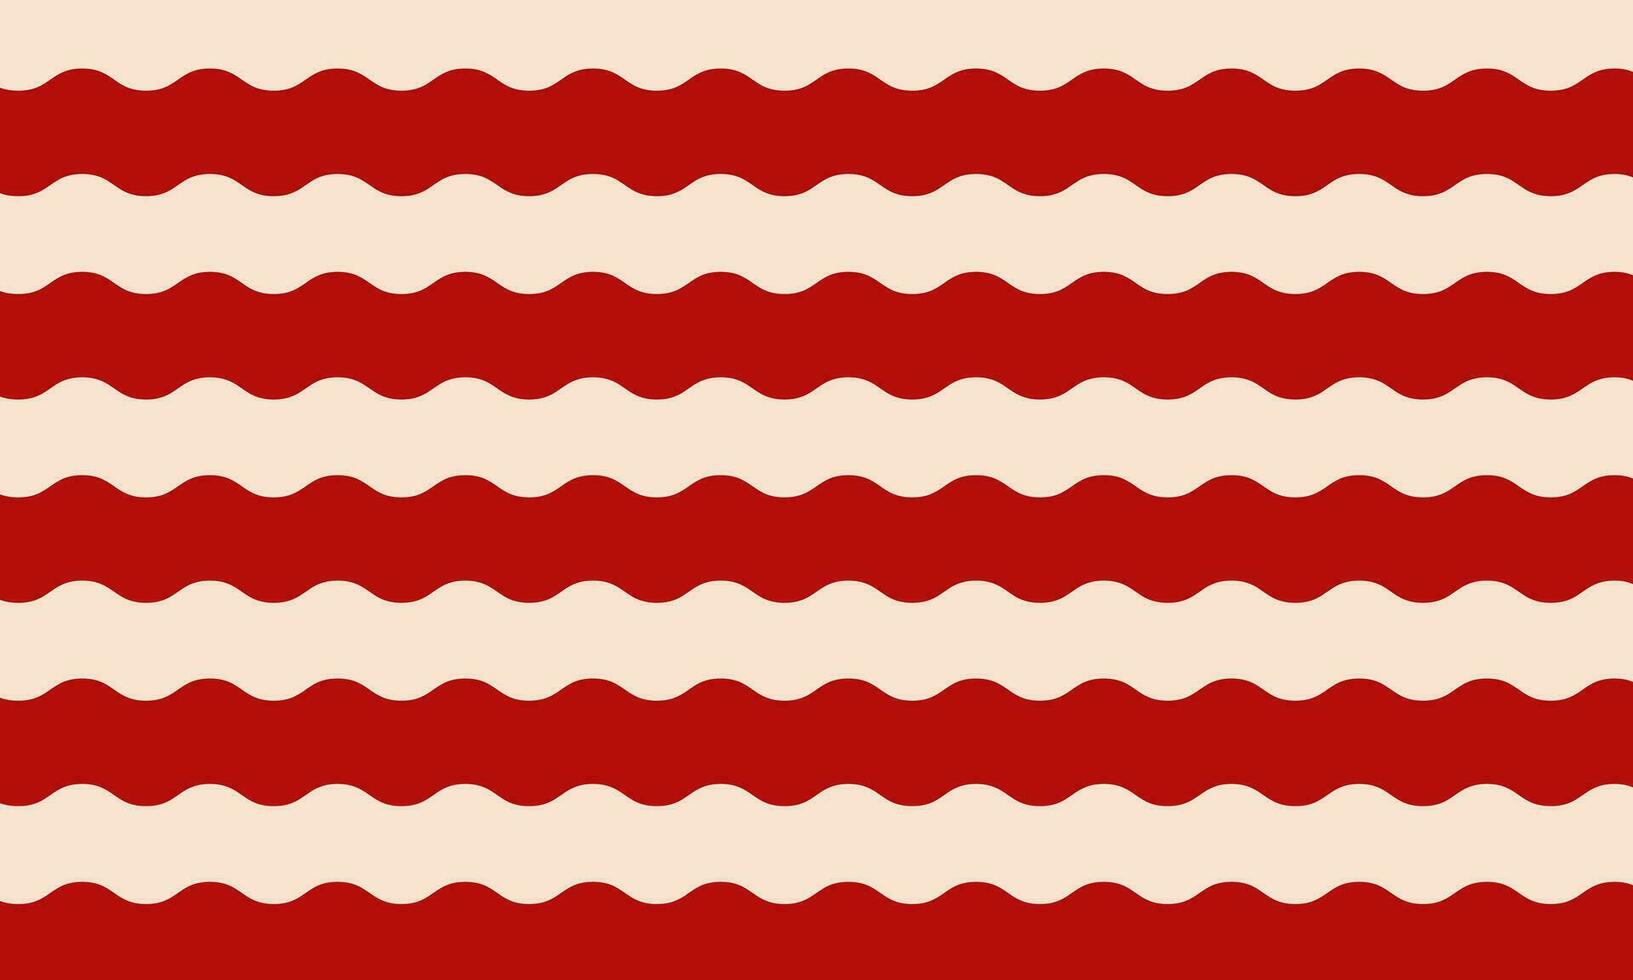 Background of simple red wavy thick vector stripes